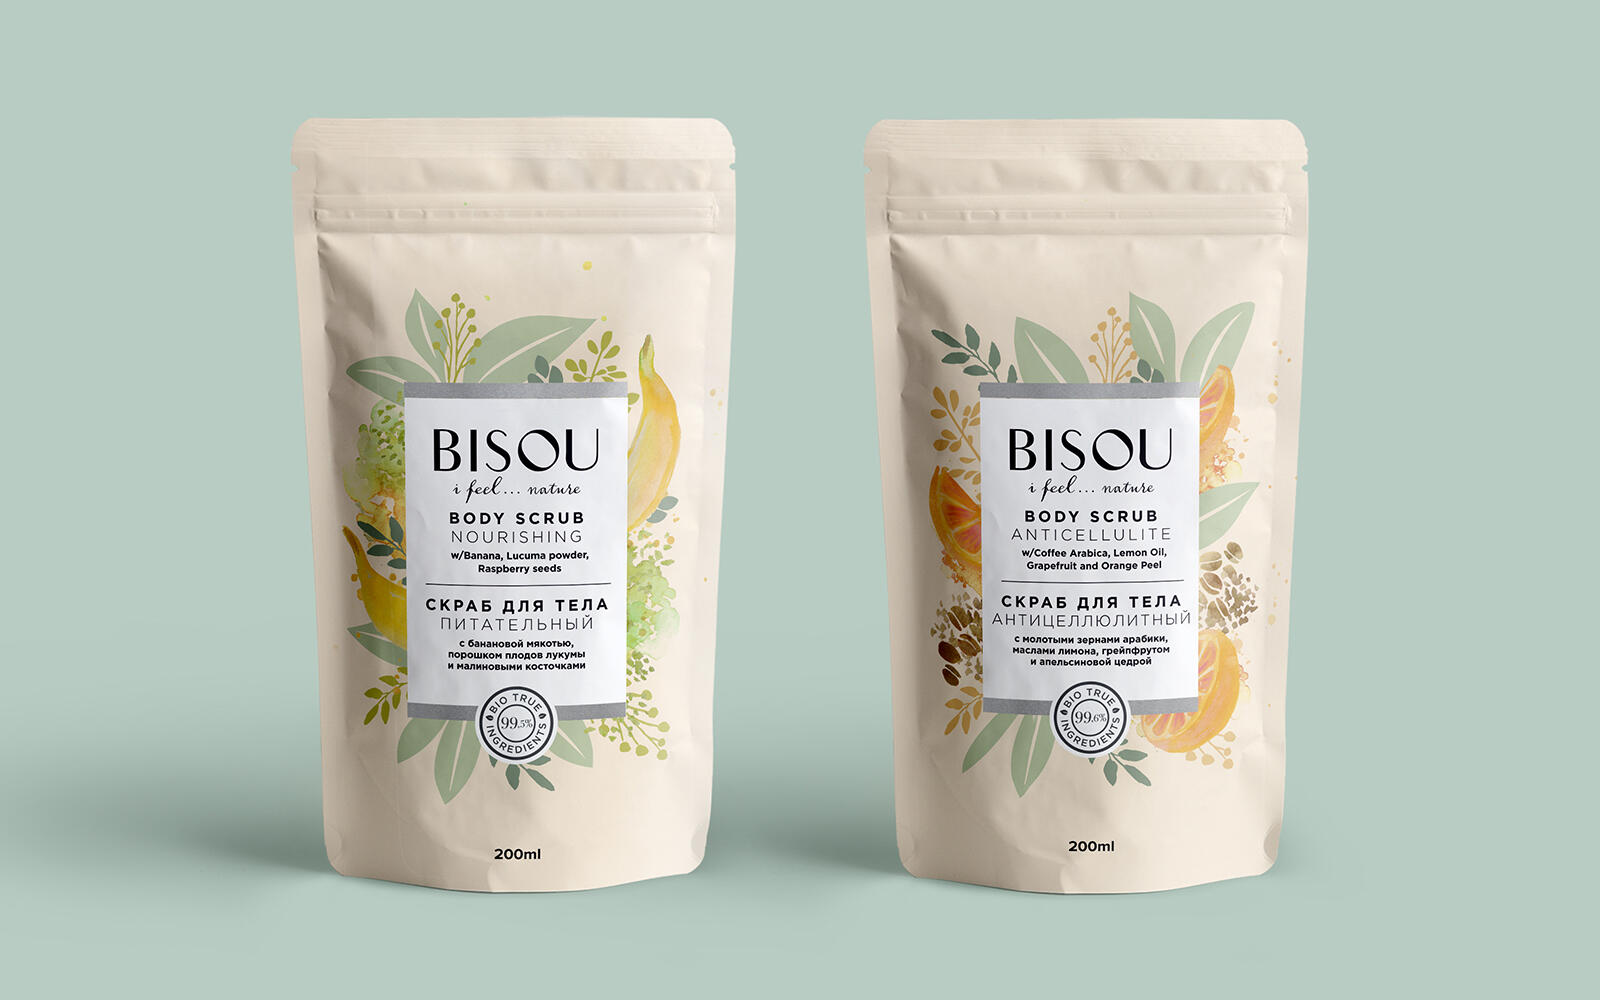 BISOU — brand of natural cosmetics – Packaging Of The World